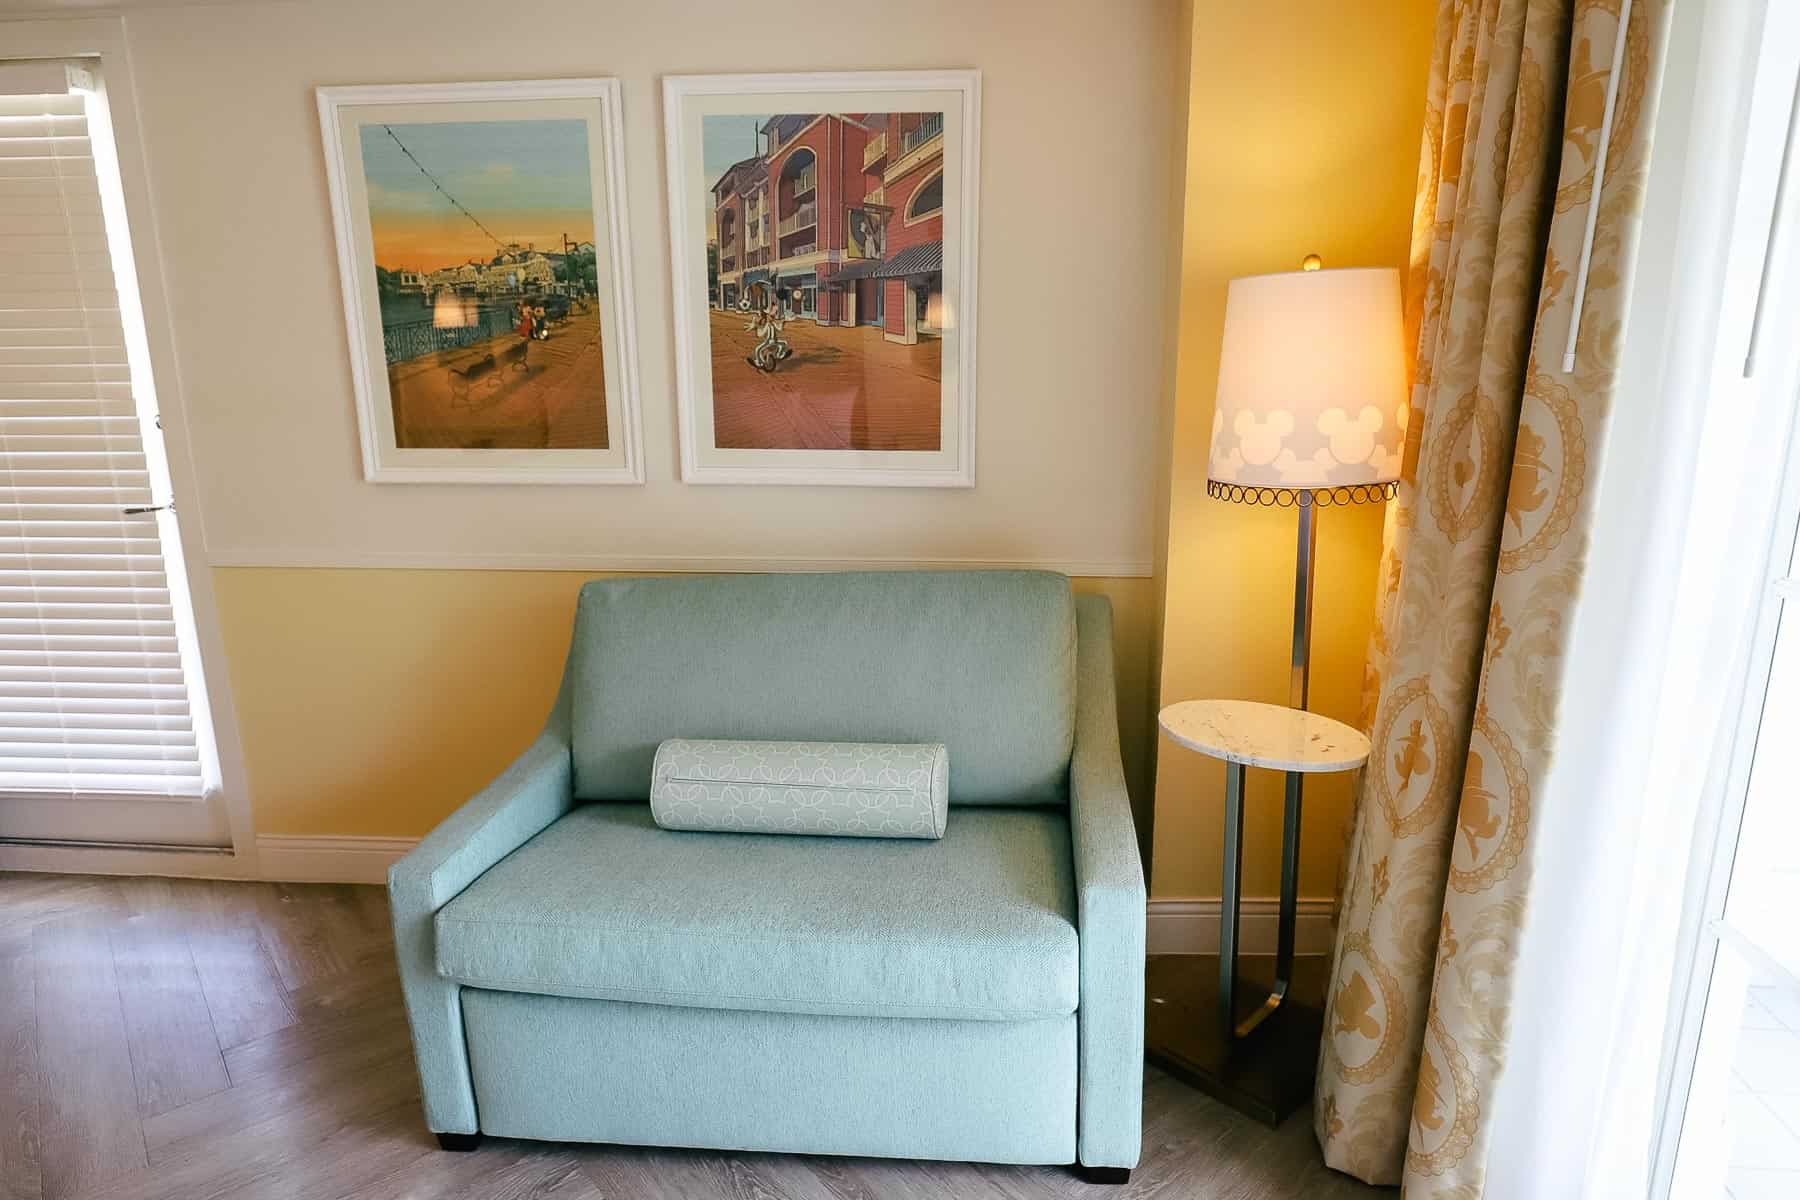 sofa that folds out to make a daybed at Disney's Boardwalk Inn